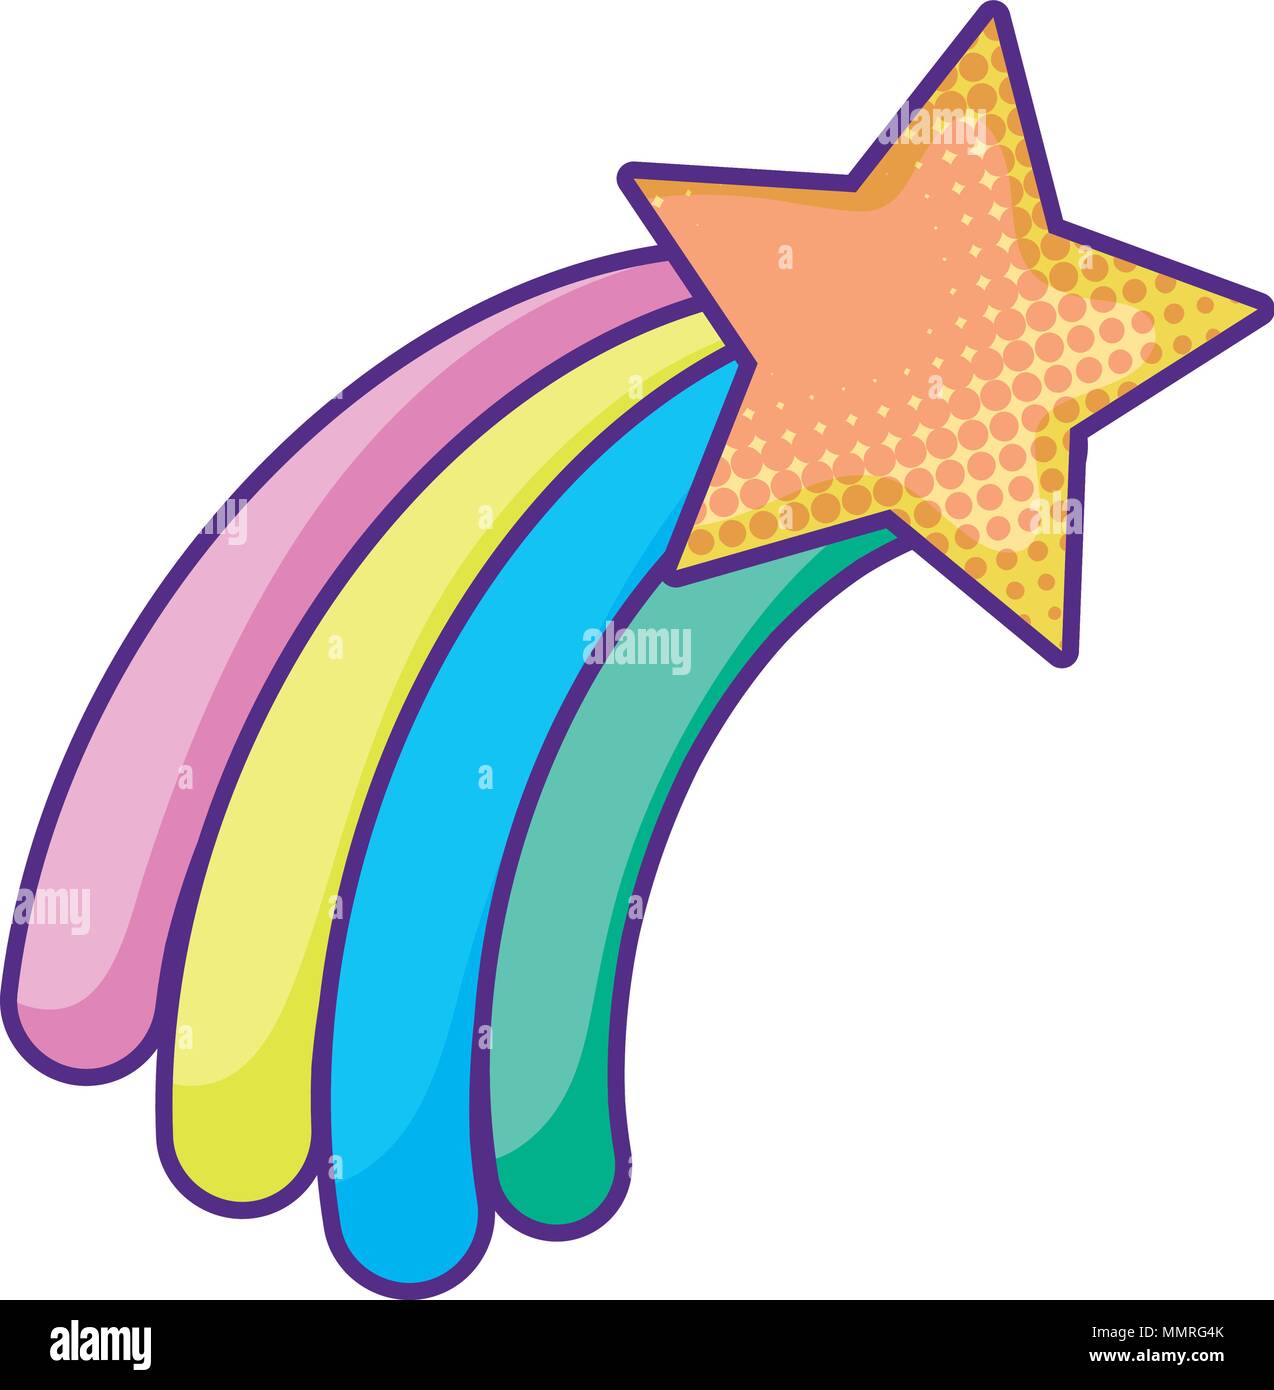 Shooting Stars Galaxy Cut Out Stock Images Pictures Alamy